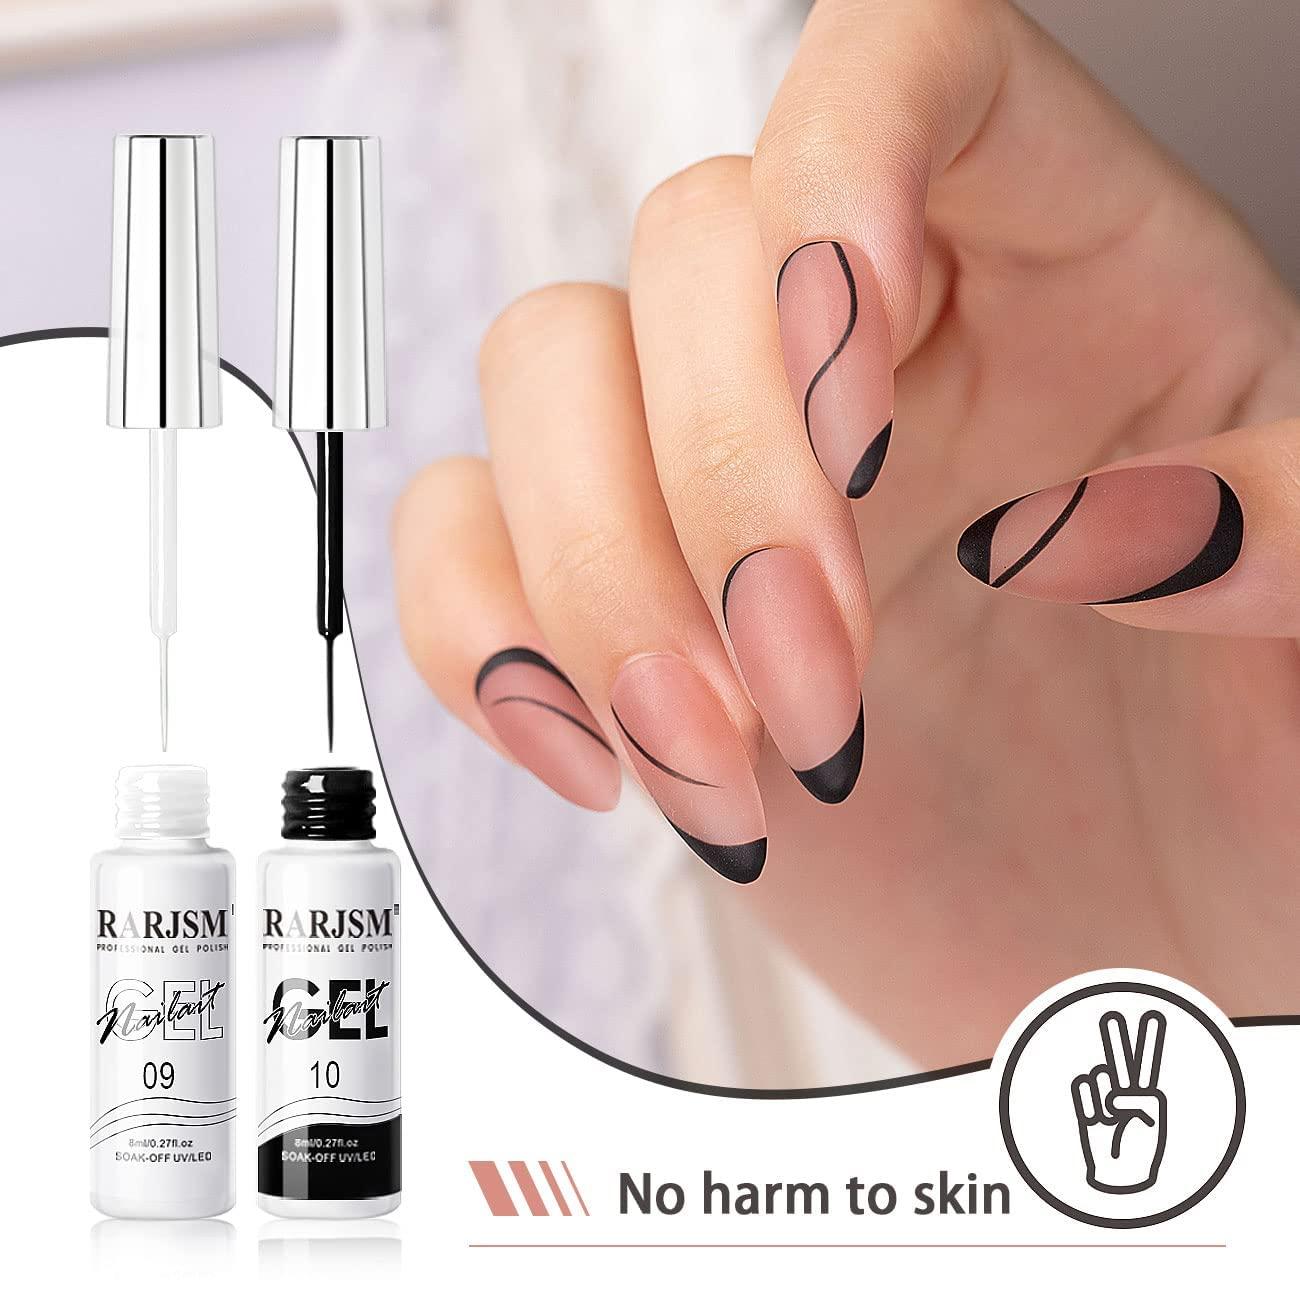 RARJSM Nail Art Gel,Liner Gel Polish,Black White Nail Design Polish Painted Gel  Nail Polish Set 2Pcs Soak off Curing Requires 8ml Build in Thin Brush for  Home Salon Diy Nail French Manicure